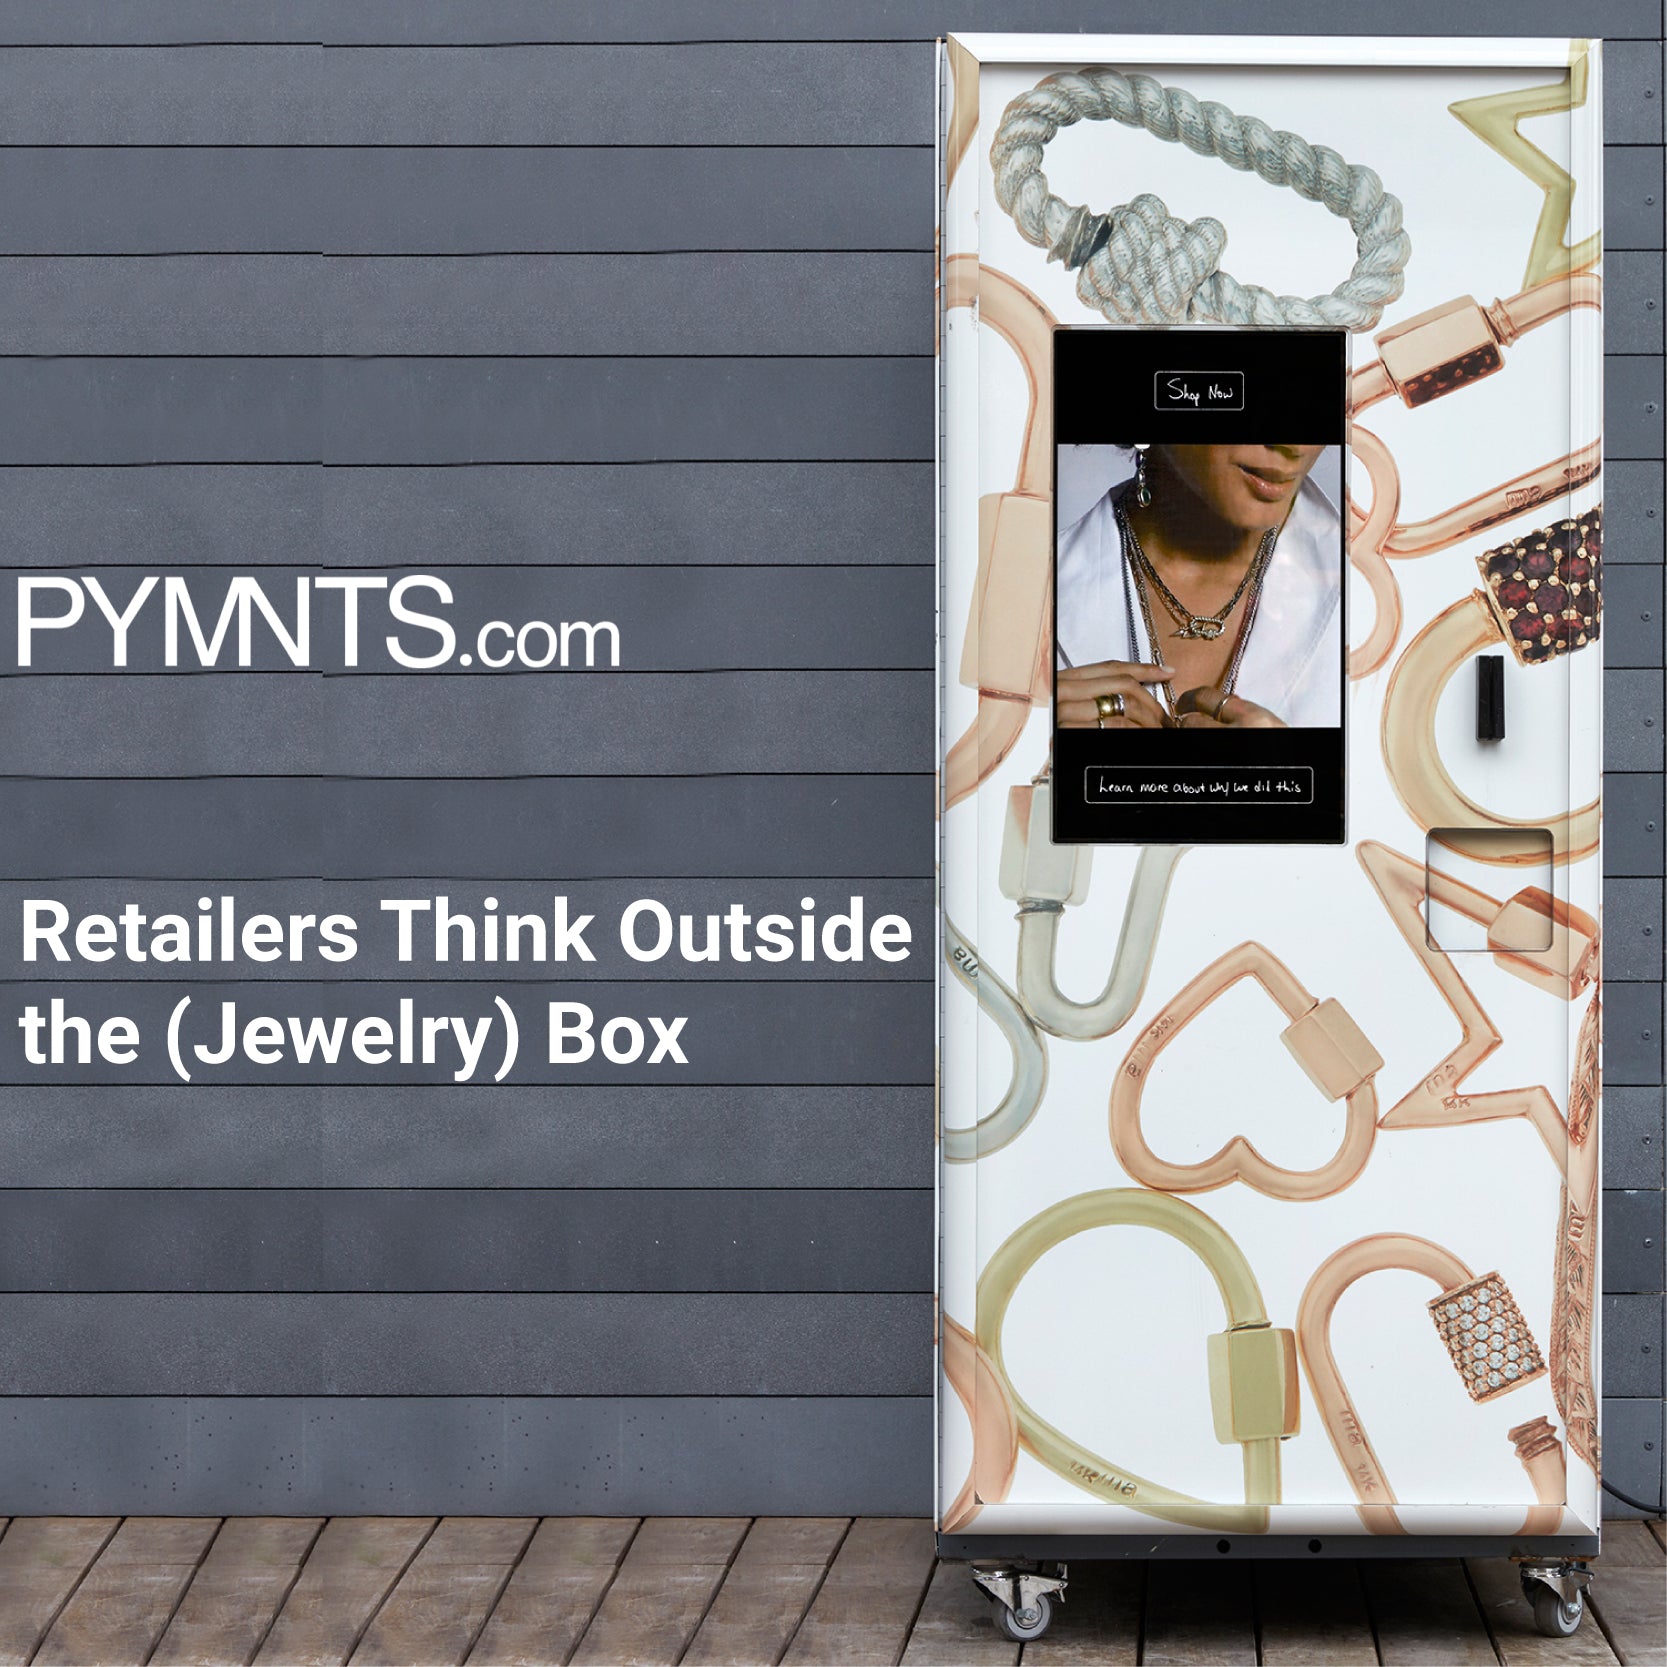 Retailers Think Outside the (Jewelry) Box